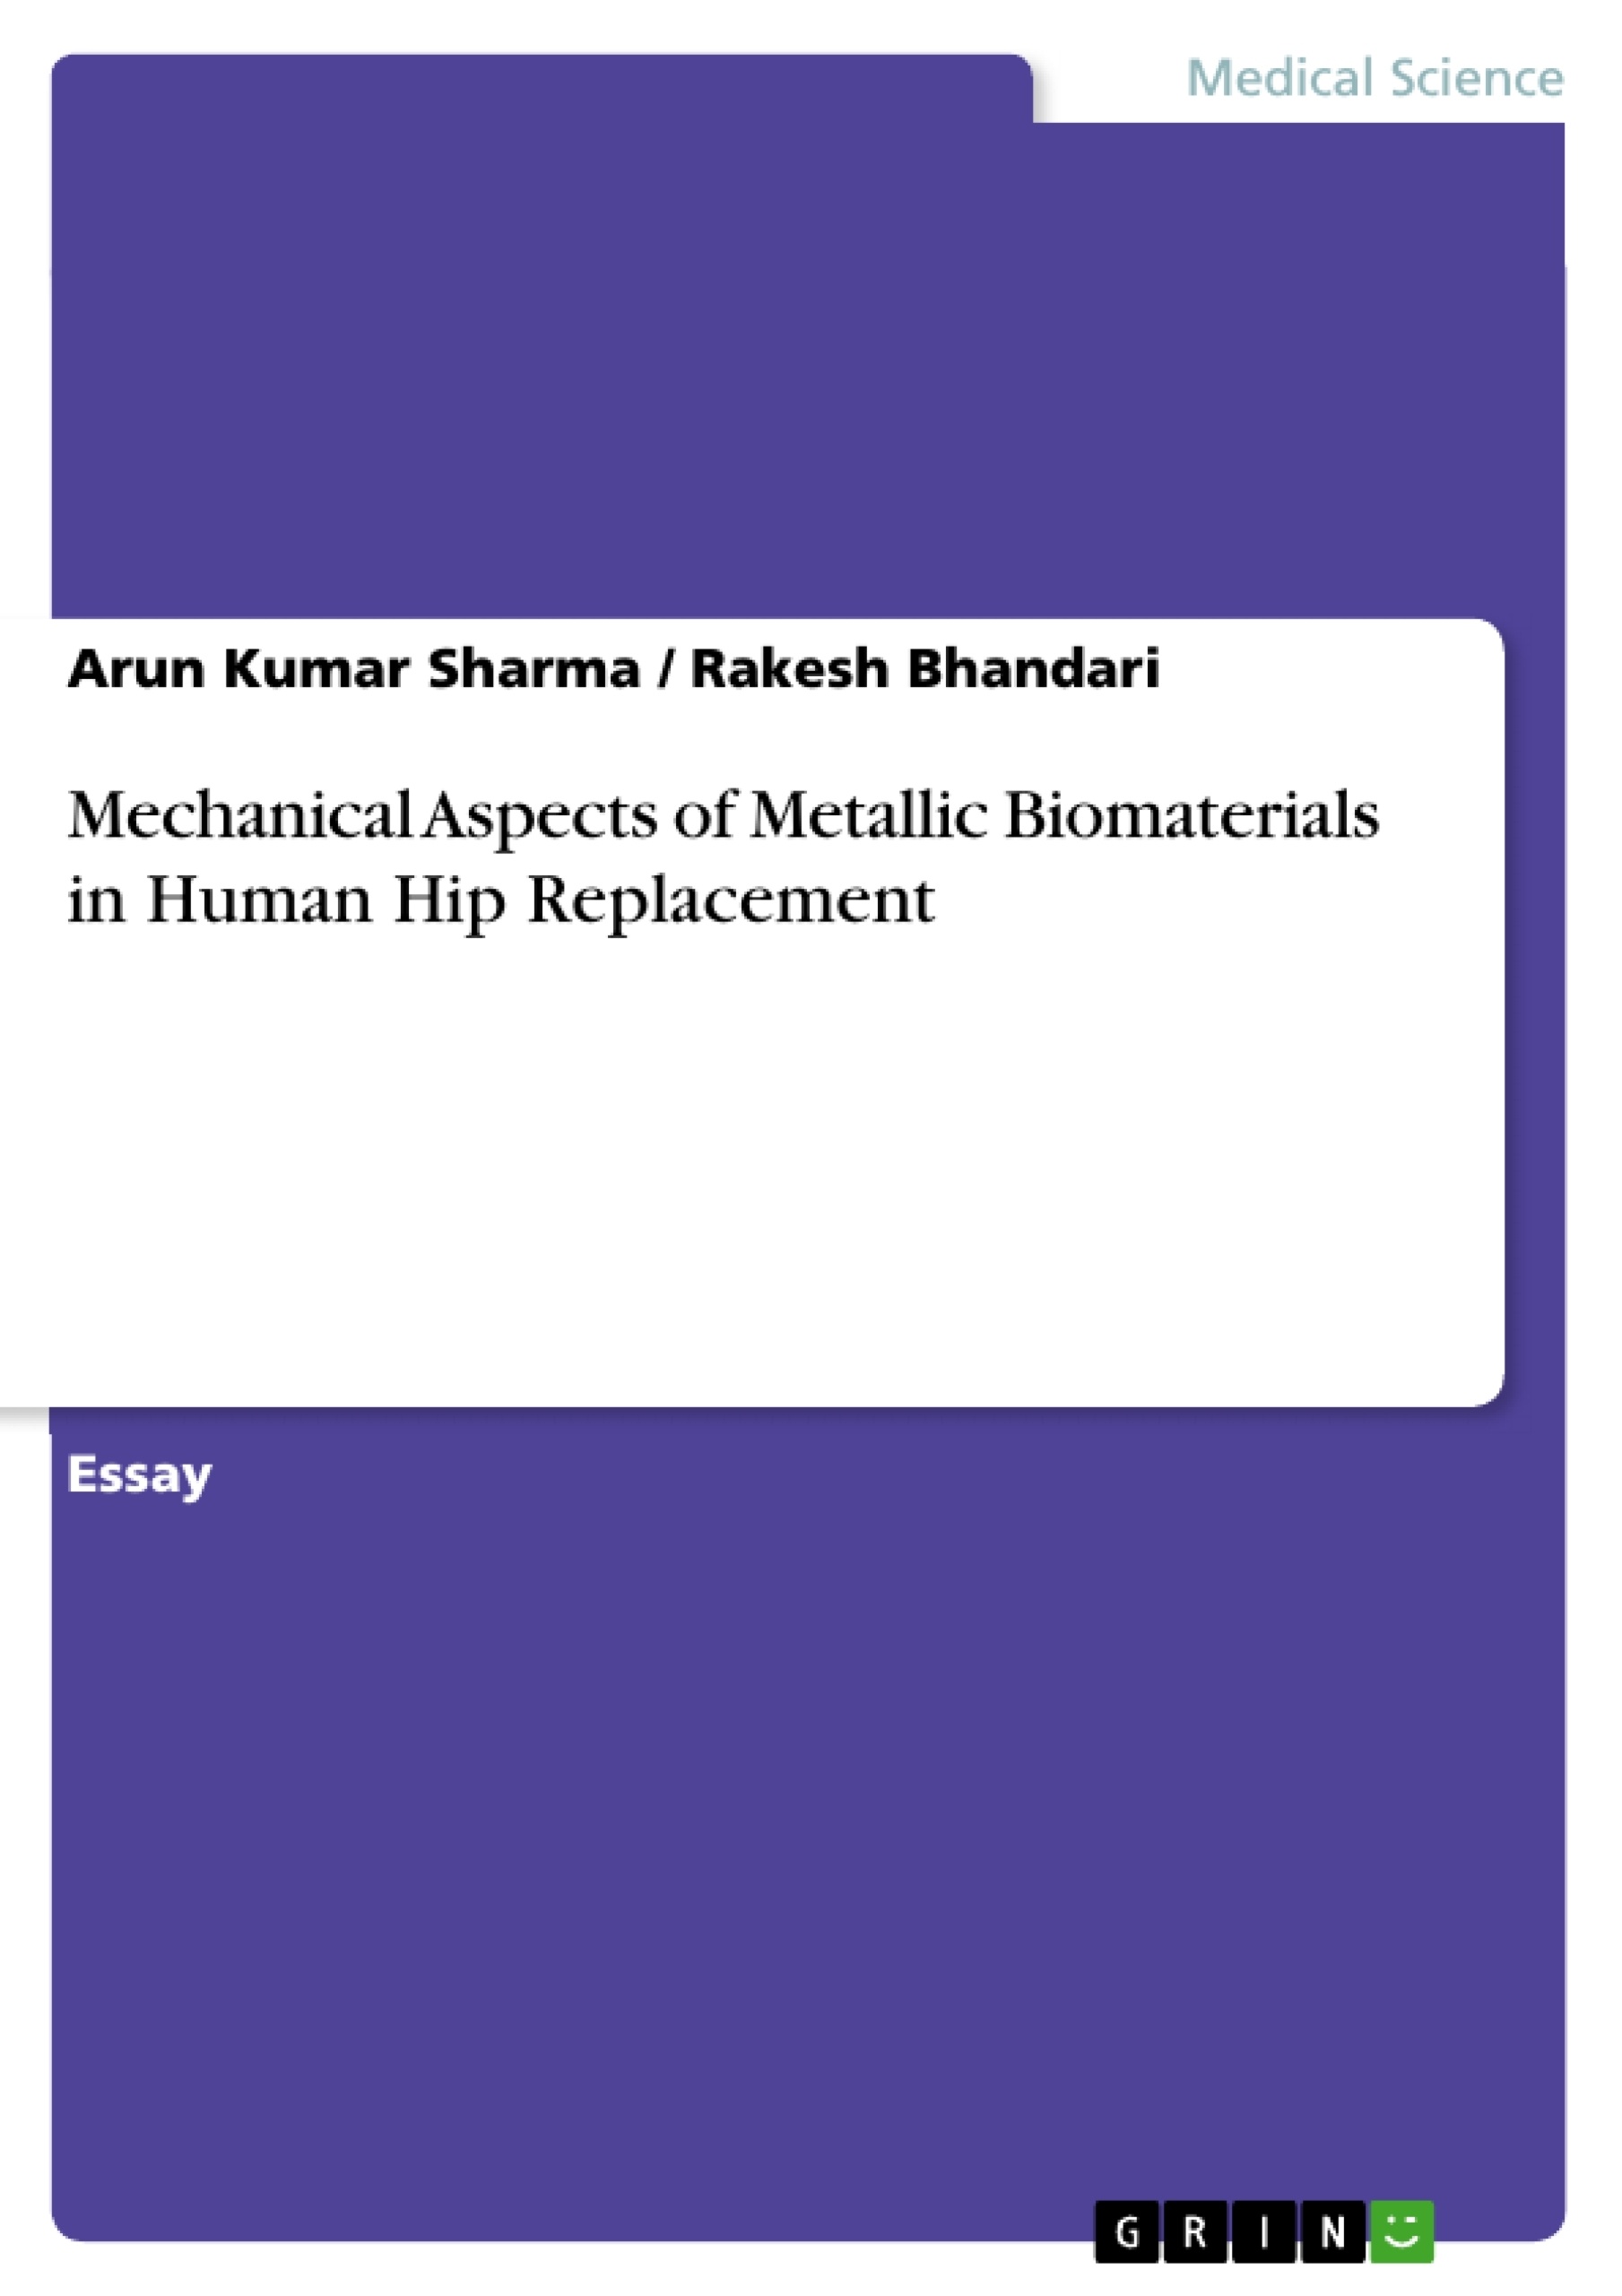 Titel: Mechanical Aspects of Metallic Biomaterials in Human Hip Replacement